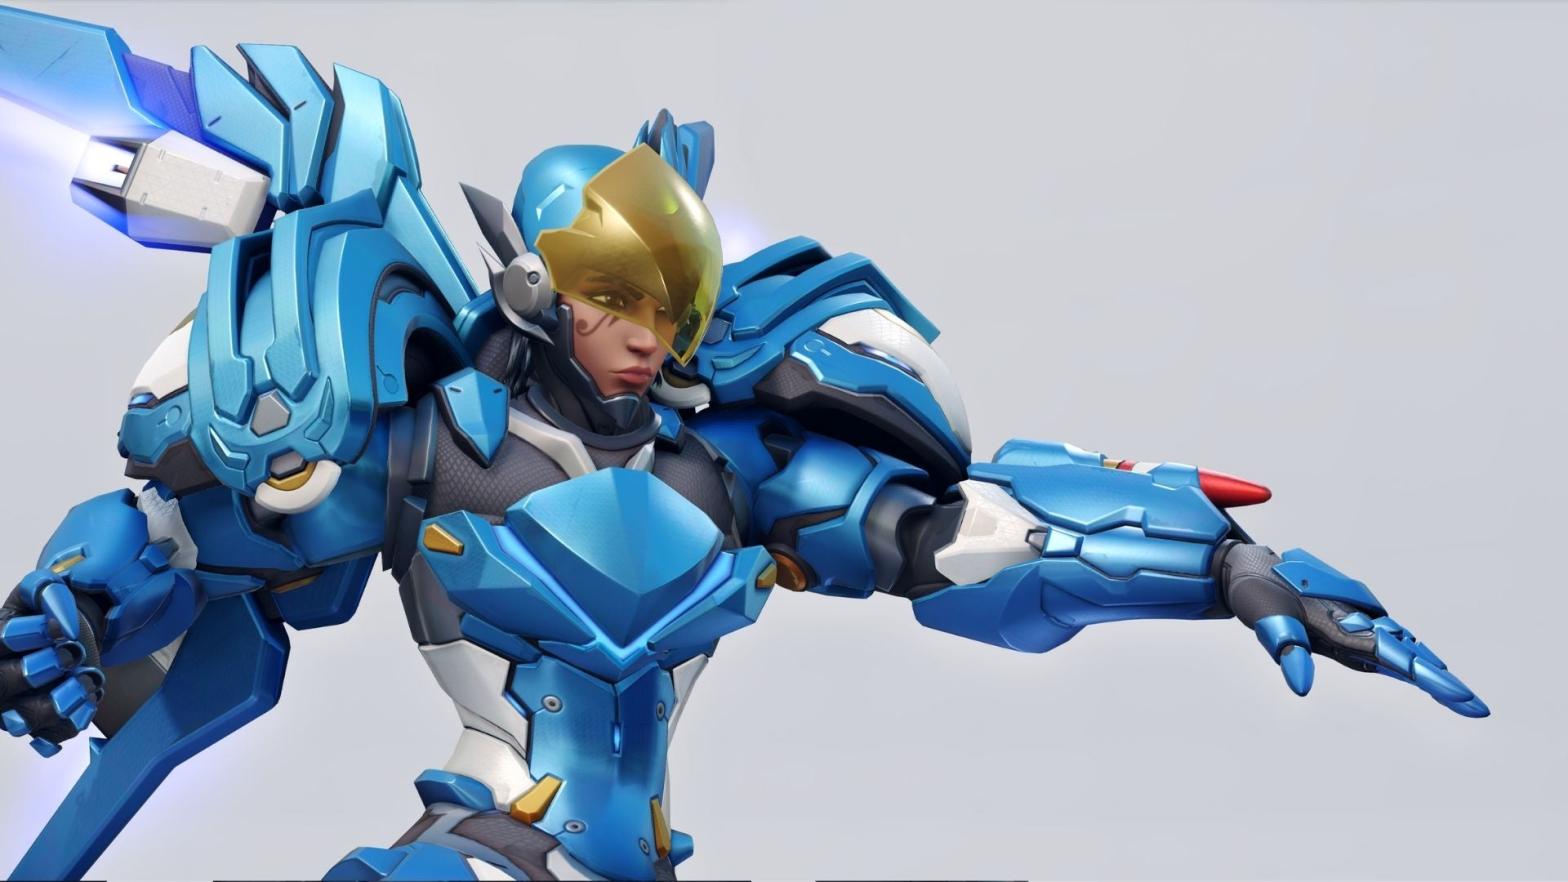 Pharah's new look in Overwatch 2. Sadly you'll have to wait for the game to get new skins. (Image: Blizzard / Kotaku)